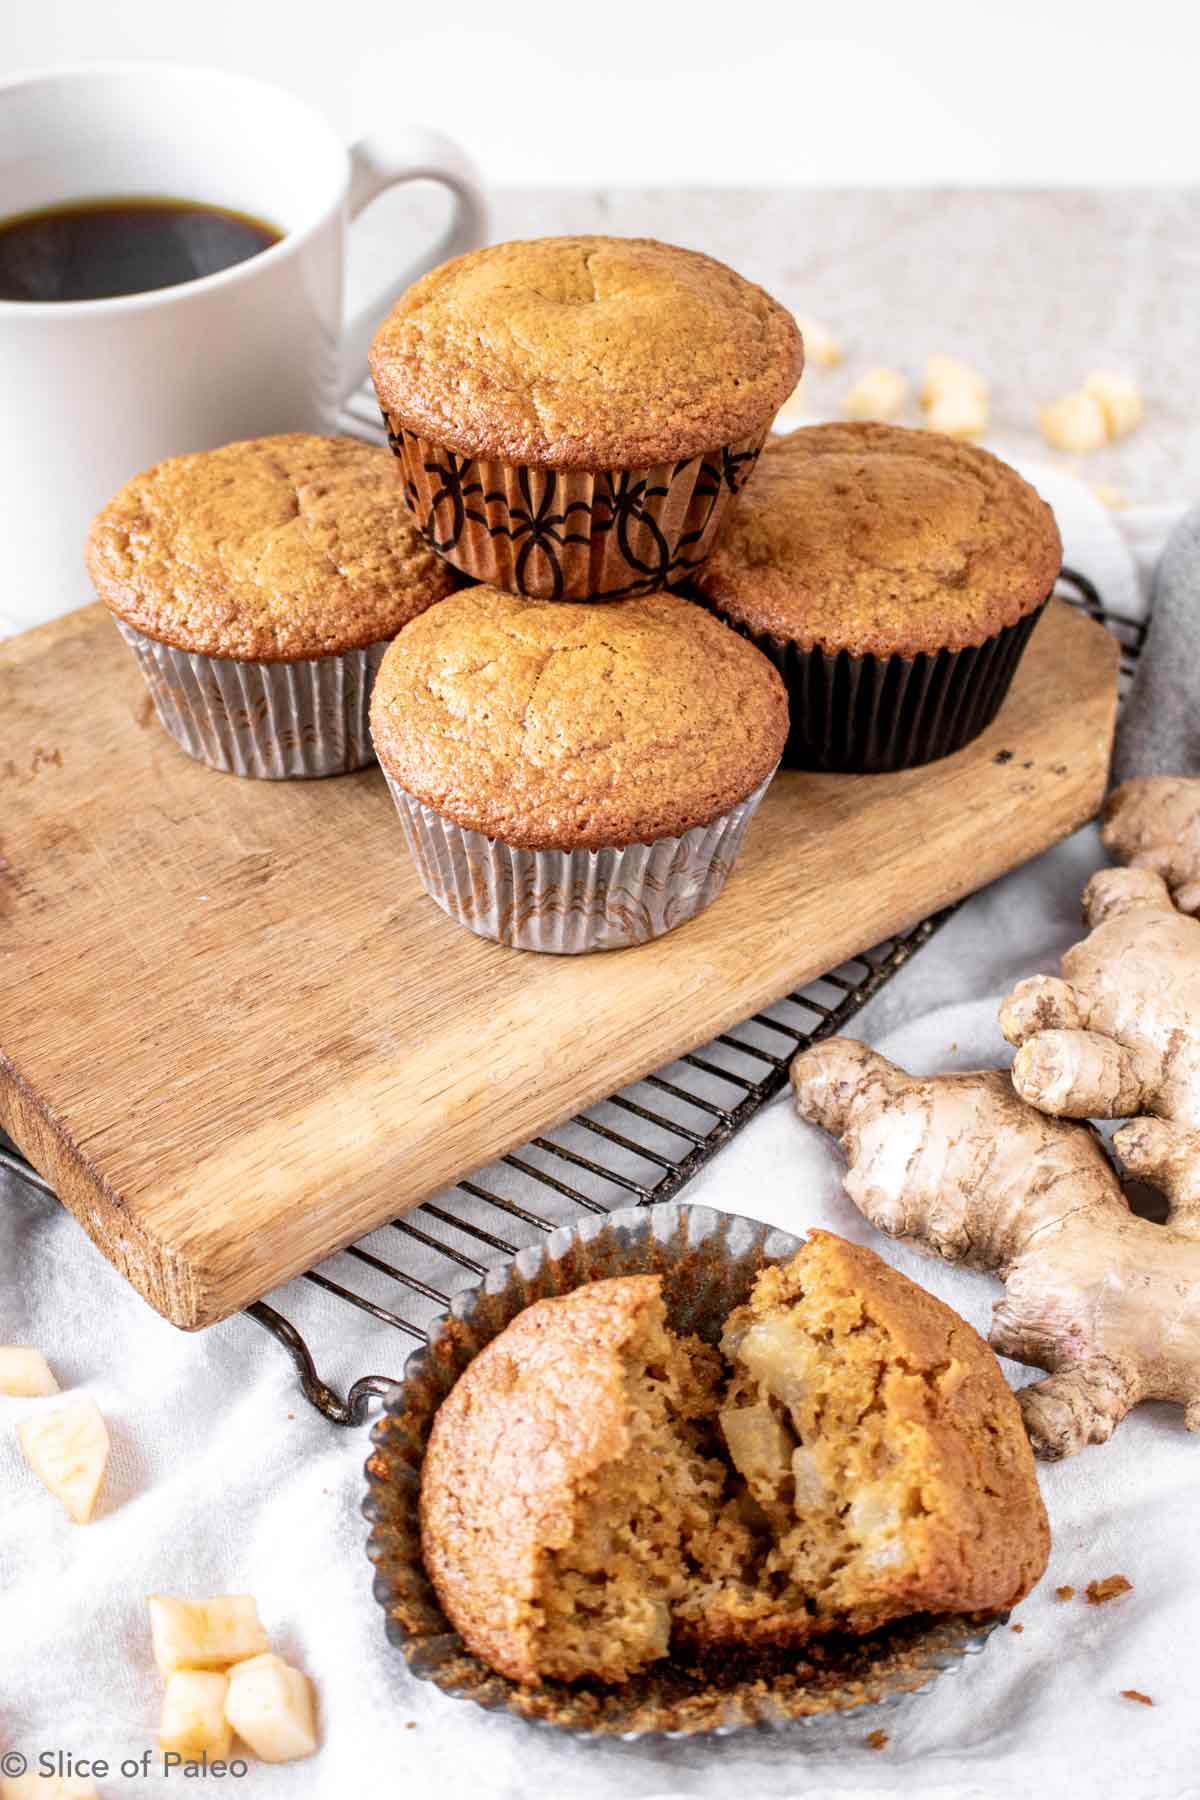 Paleo Ginger Pear Muffins ready to eat